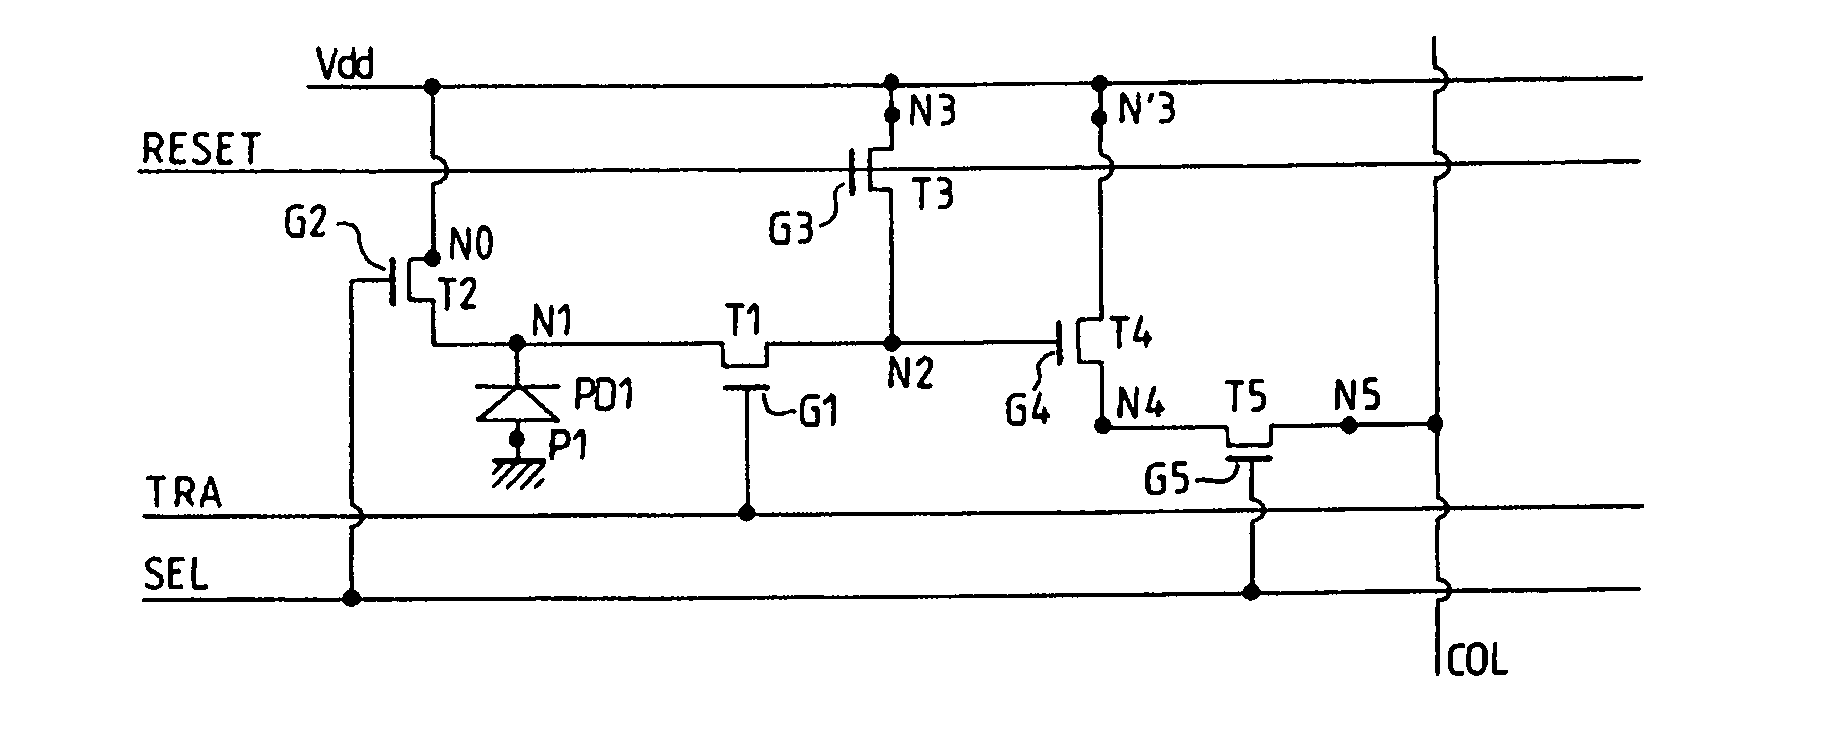 Matrix image recorder with image sensor and a plurality of row conductors